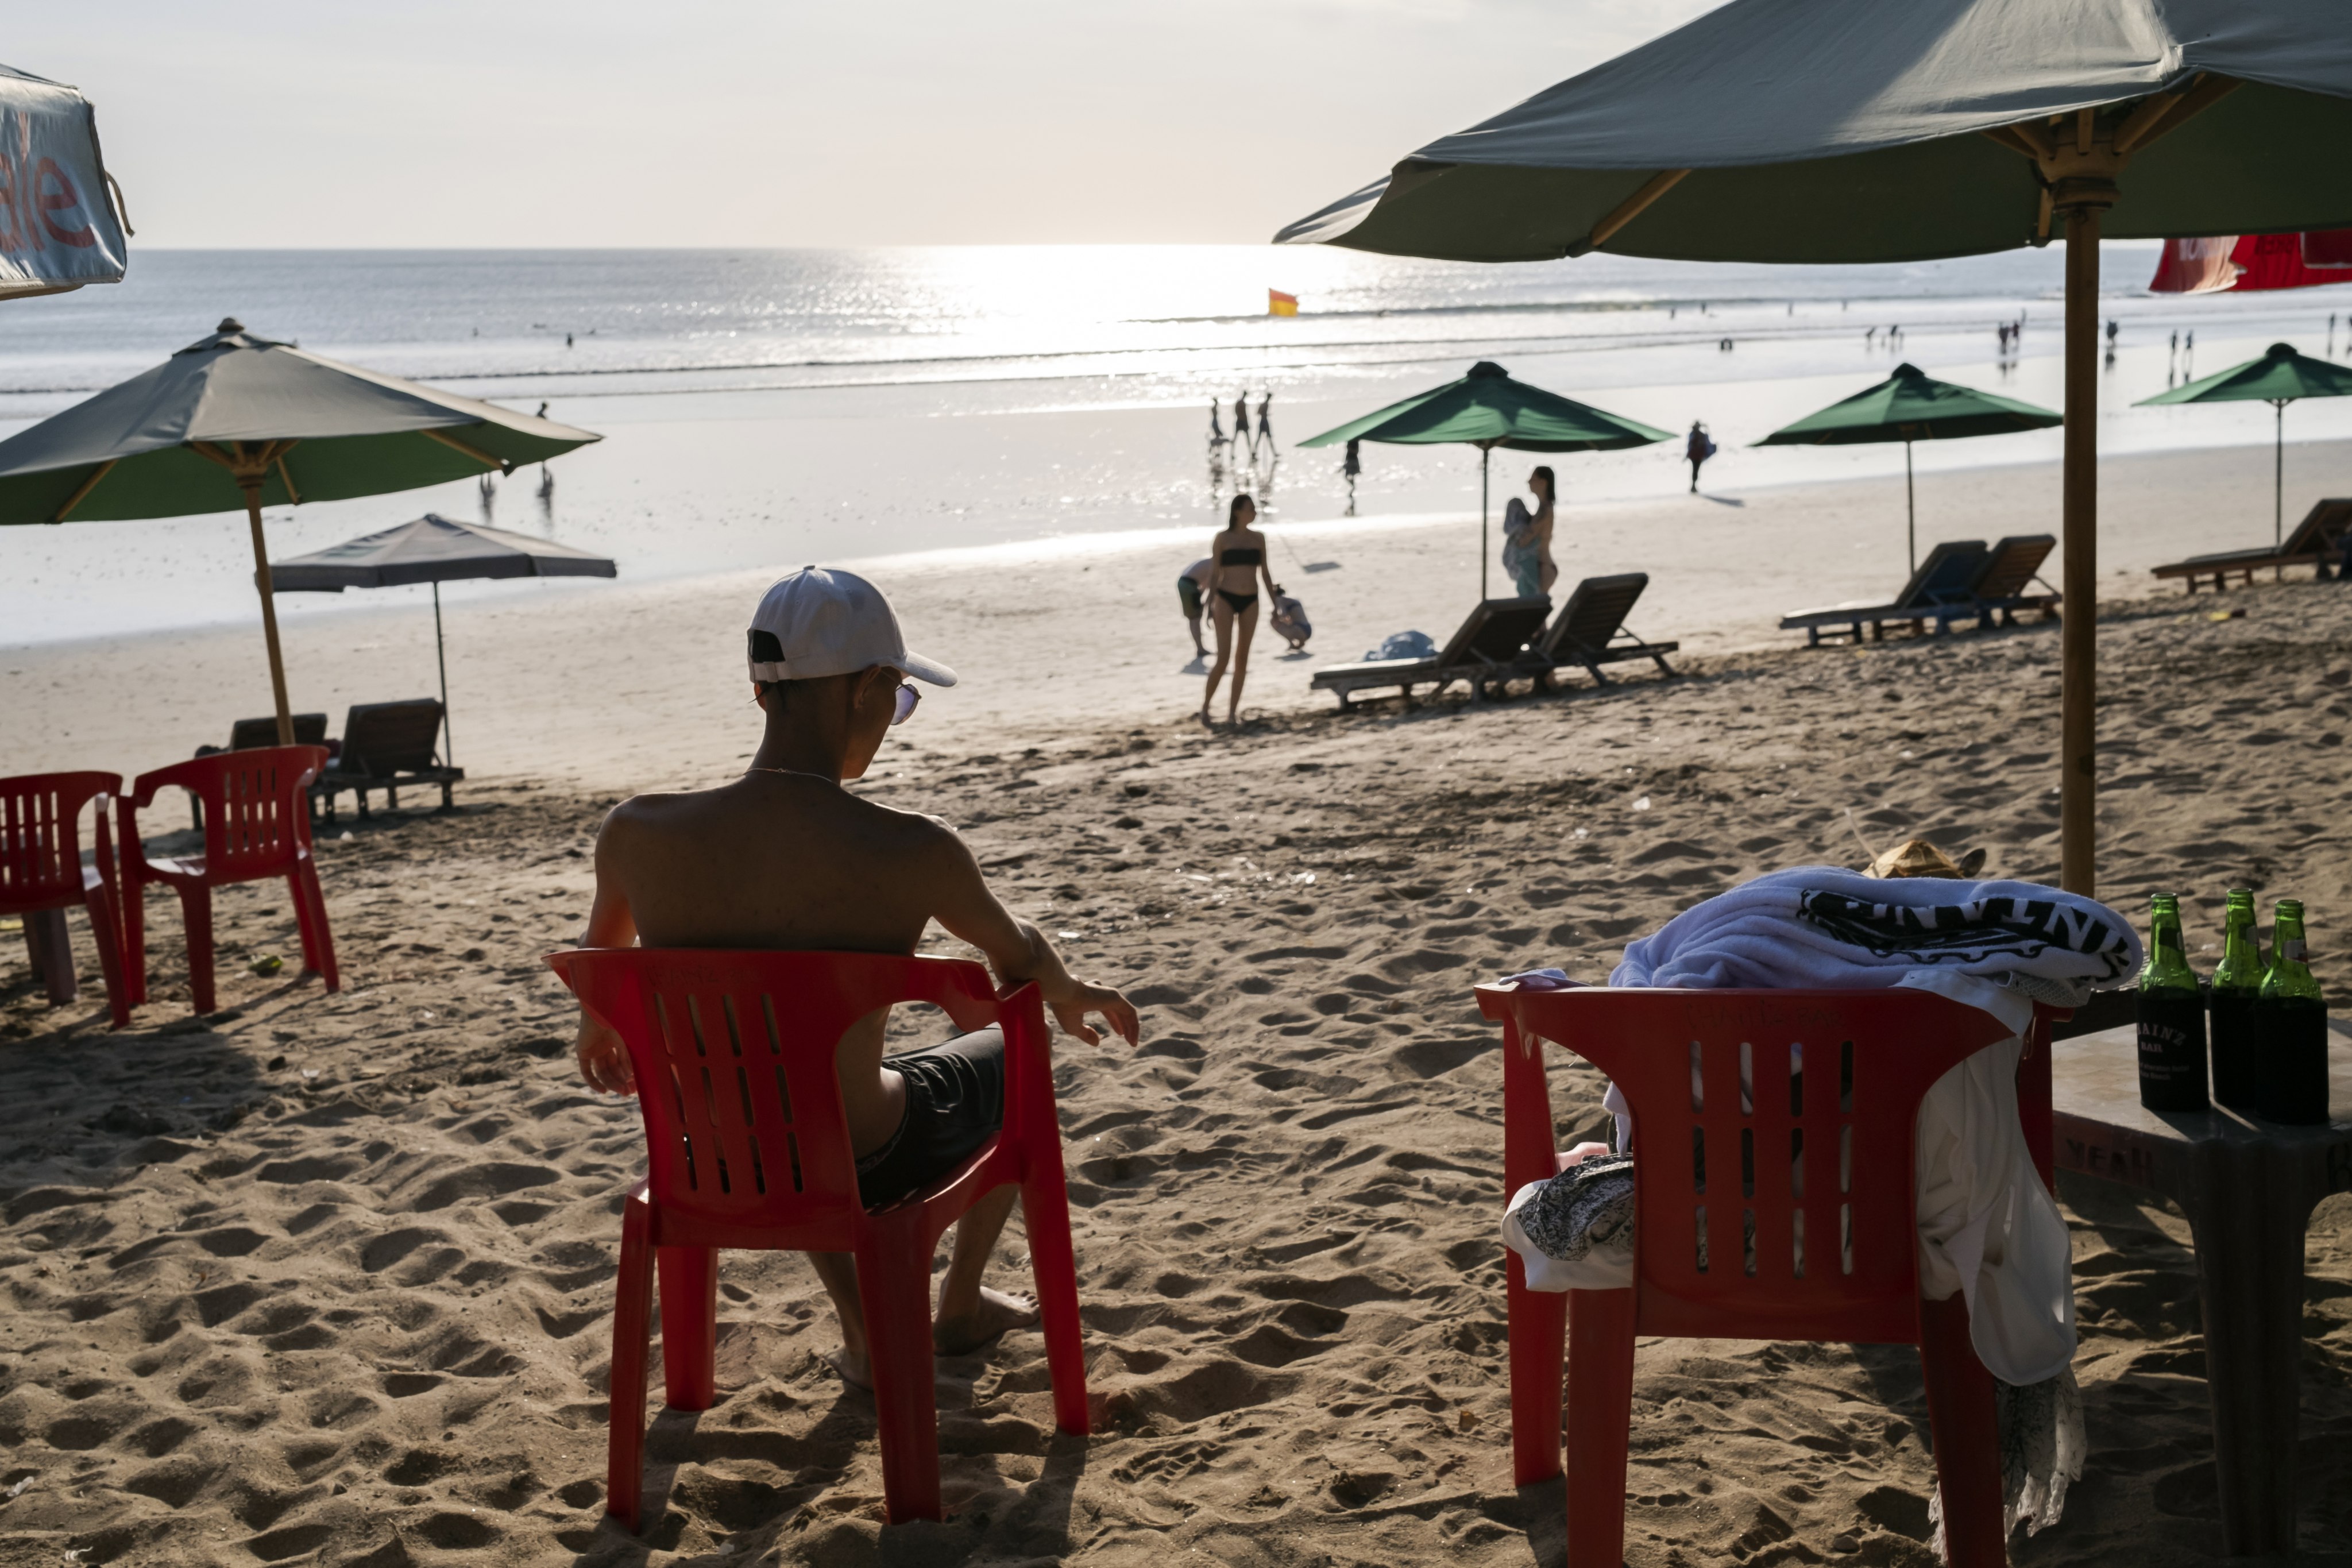 Foreign tourists sit at a beach in Kuta, Bali last month. Photo: EPA-EFE